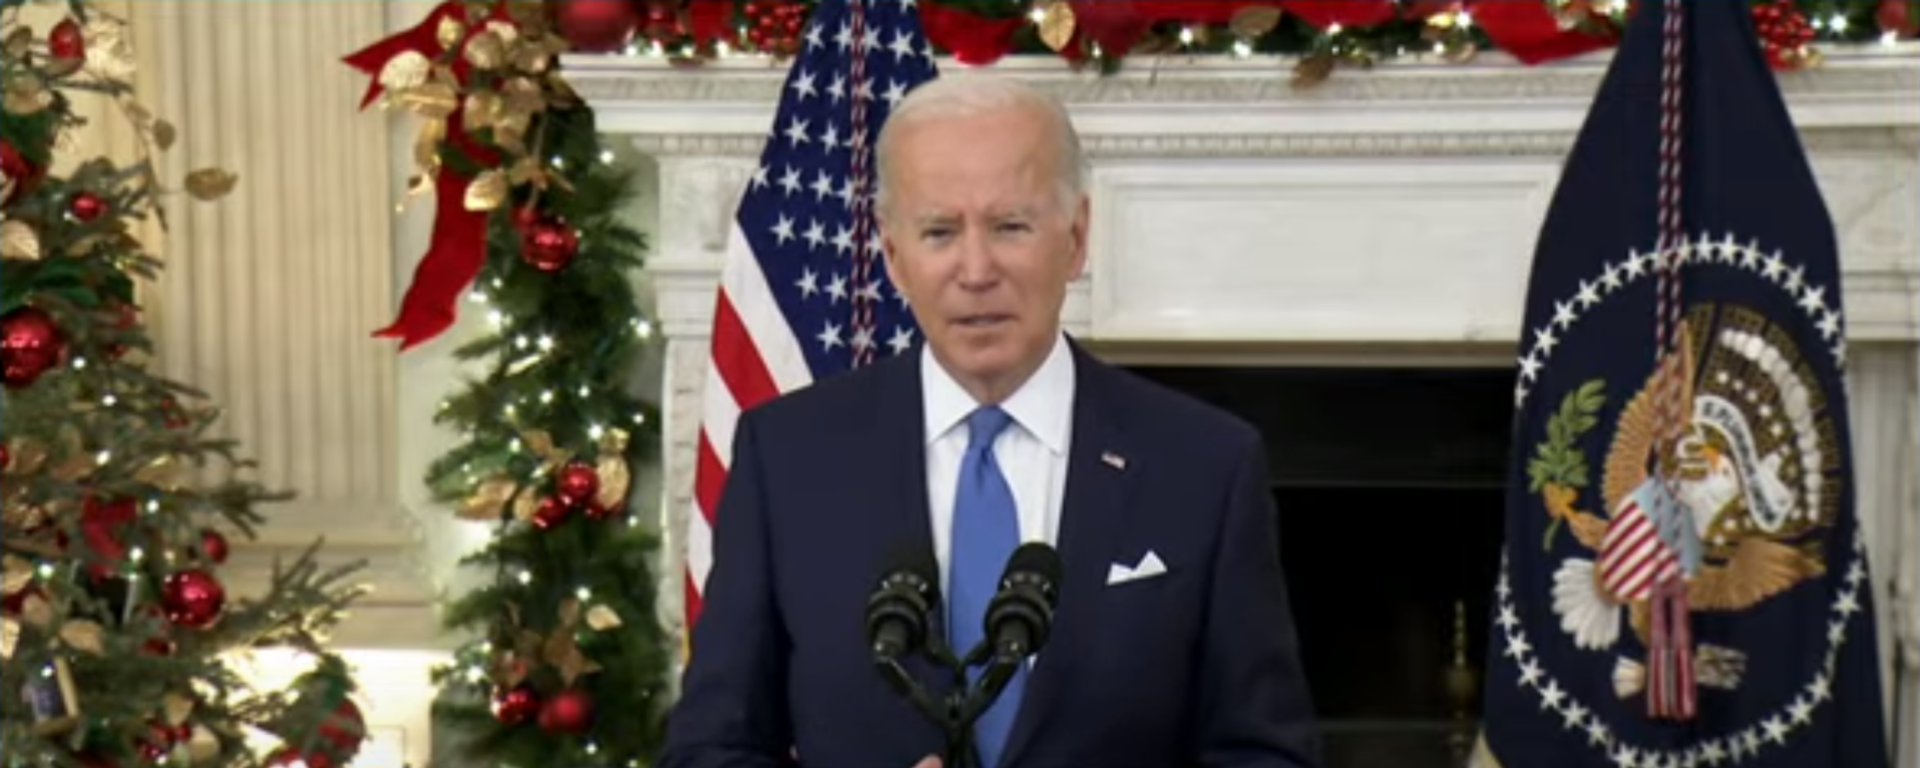 US President Joe Biden speaks from the White House about his administration's preparations for the Omicron variant of COVID-19 on December 21, 2021. - Sputnik International, 1920, 21.12.2021